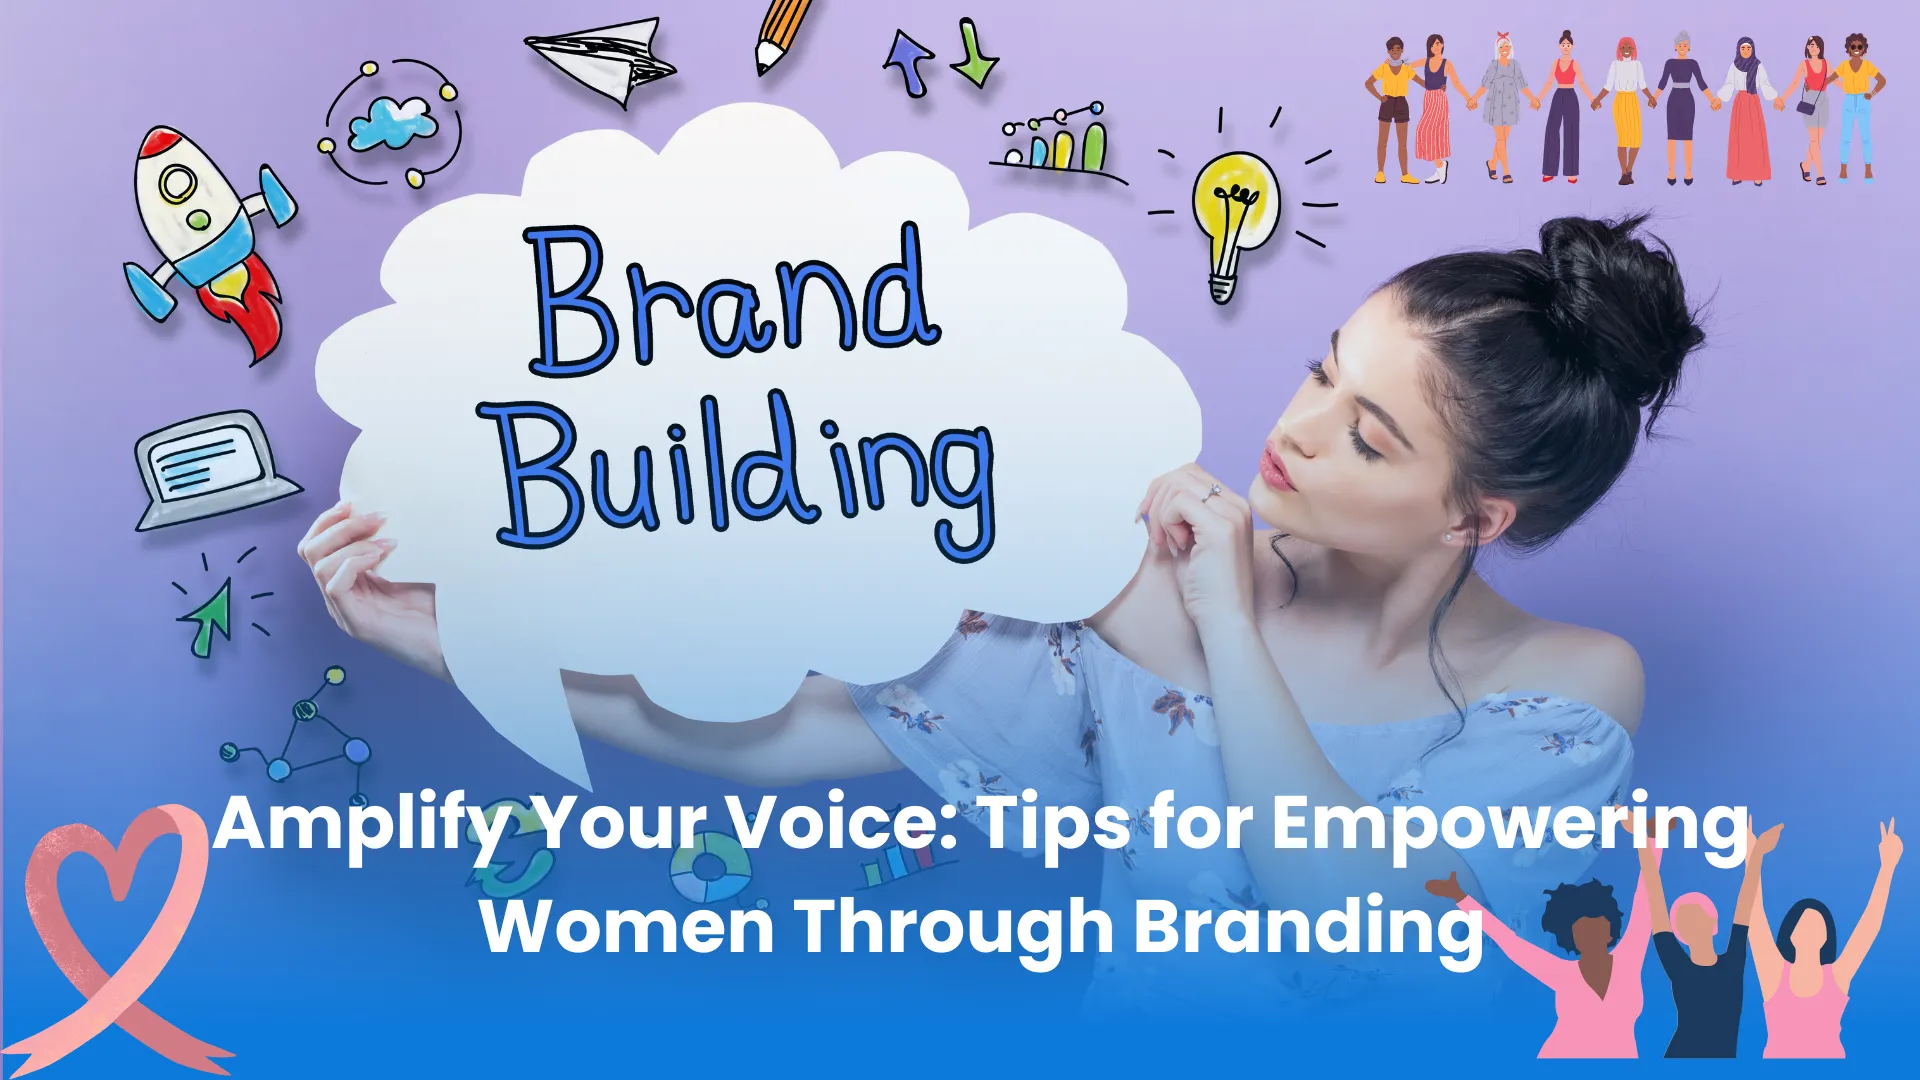 Amplify Your Voice Tips for Empowering Women Through Branding